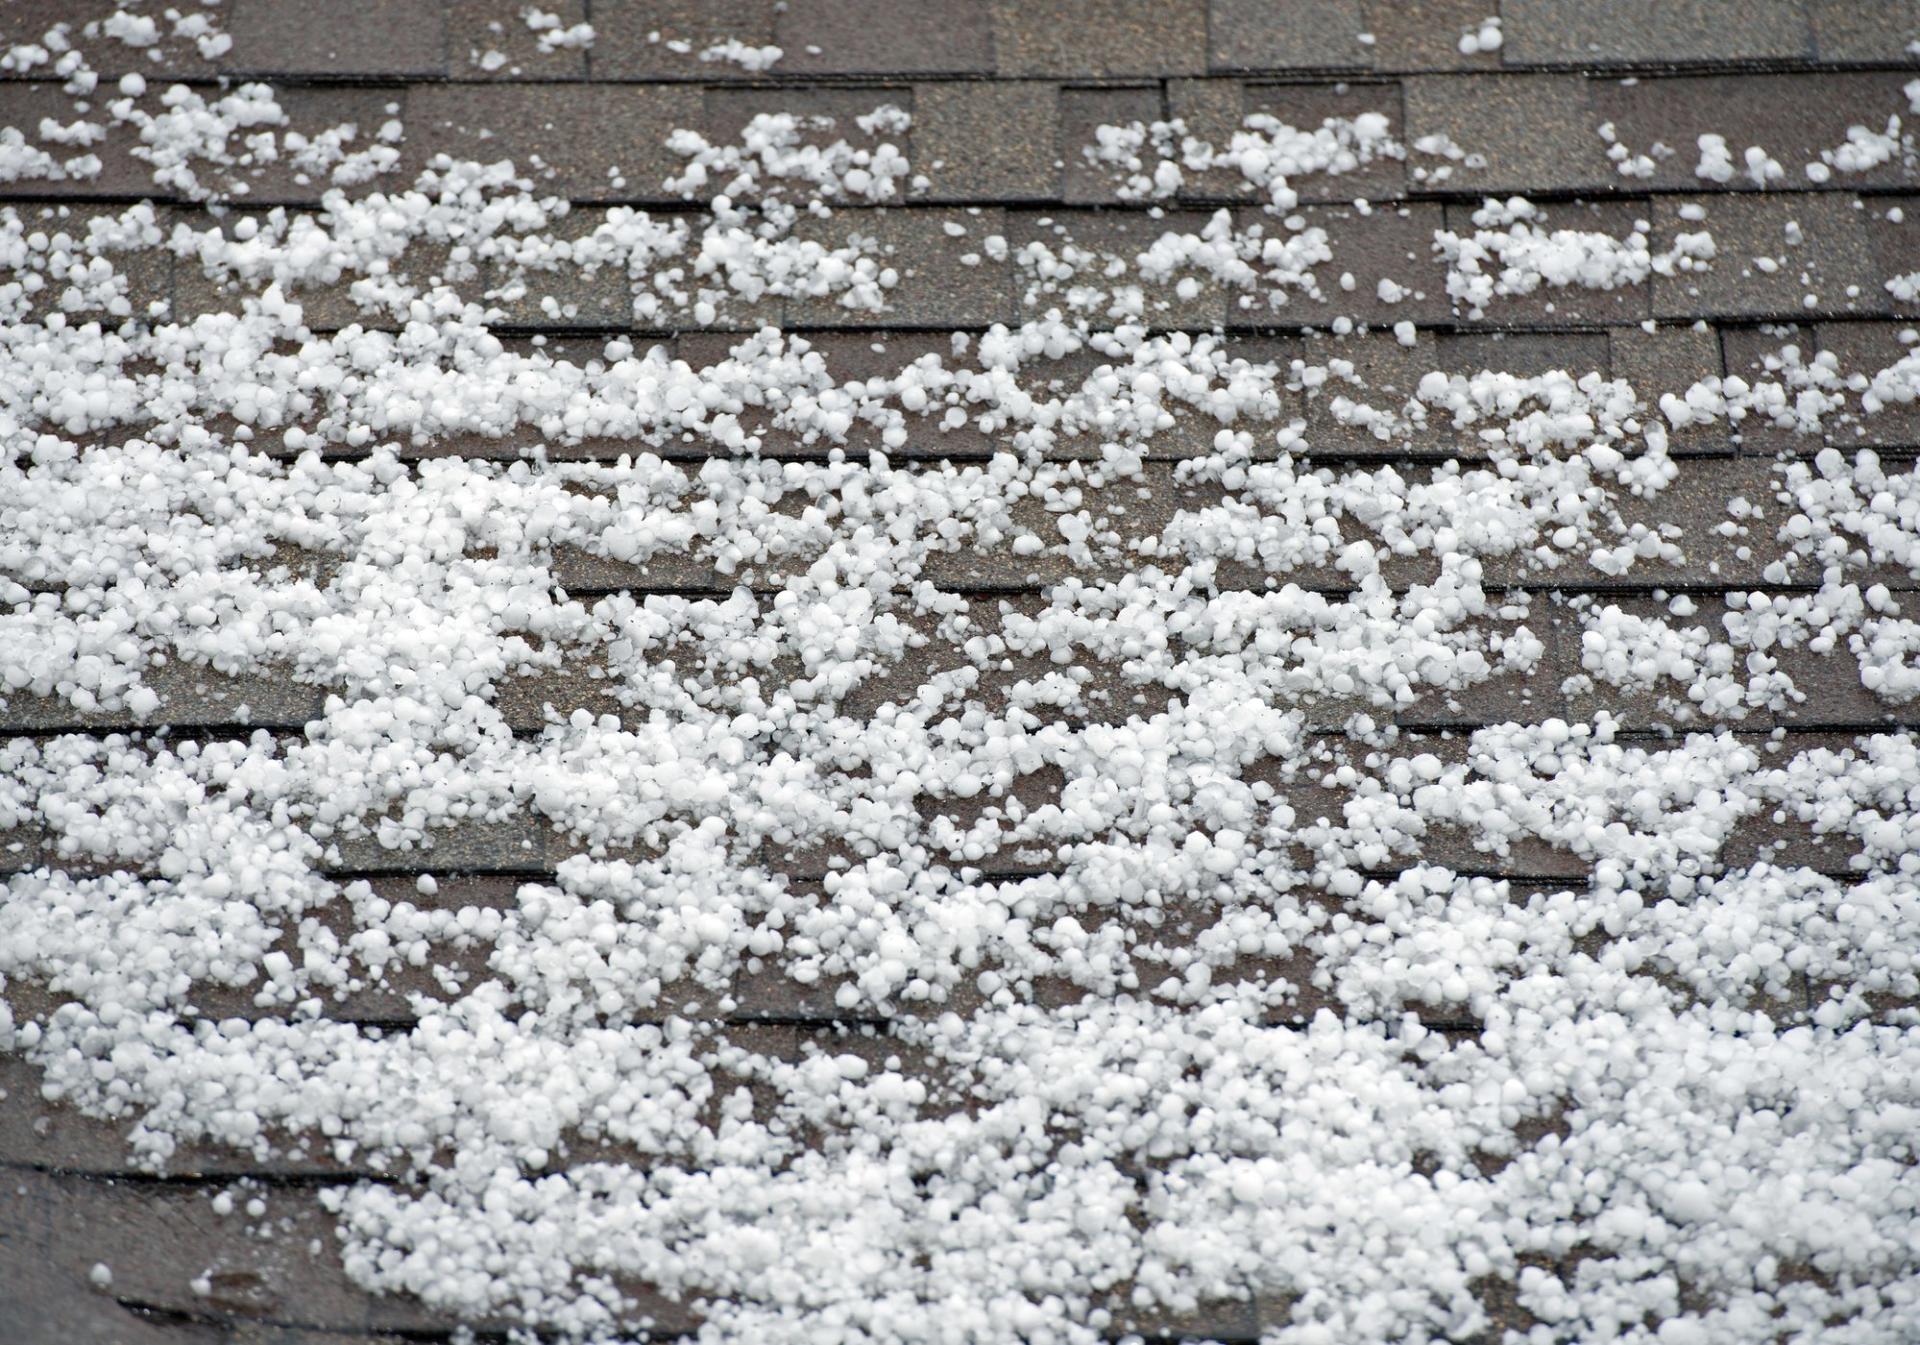 Hail on a New Jersey roof.